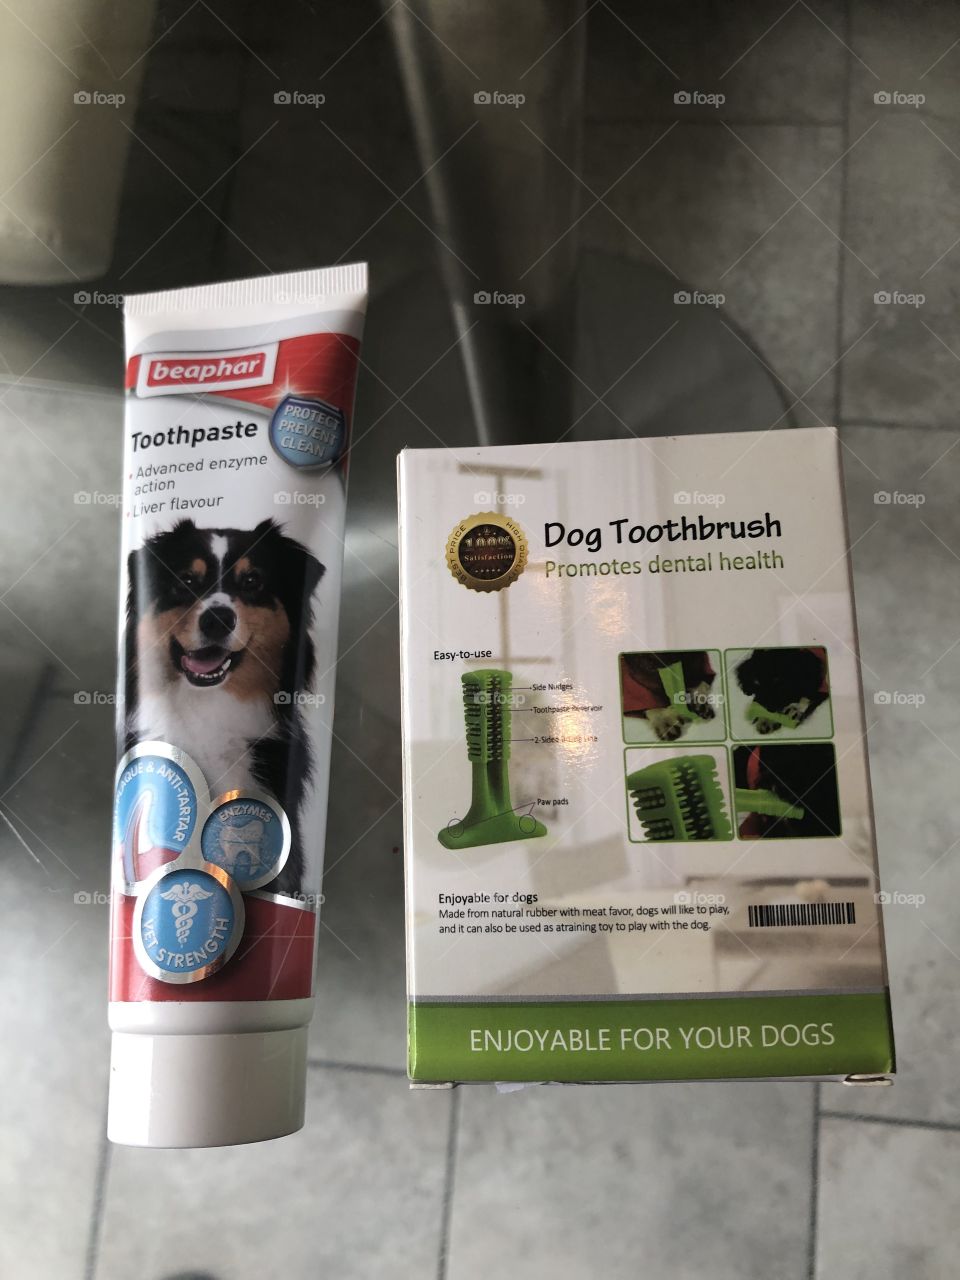 Great toothbrush and toothpaste for the dog.